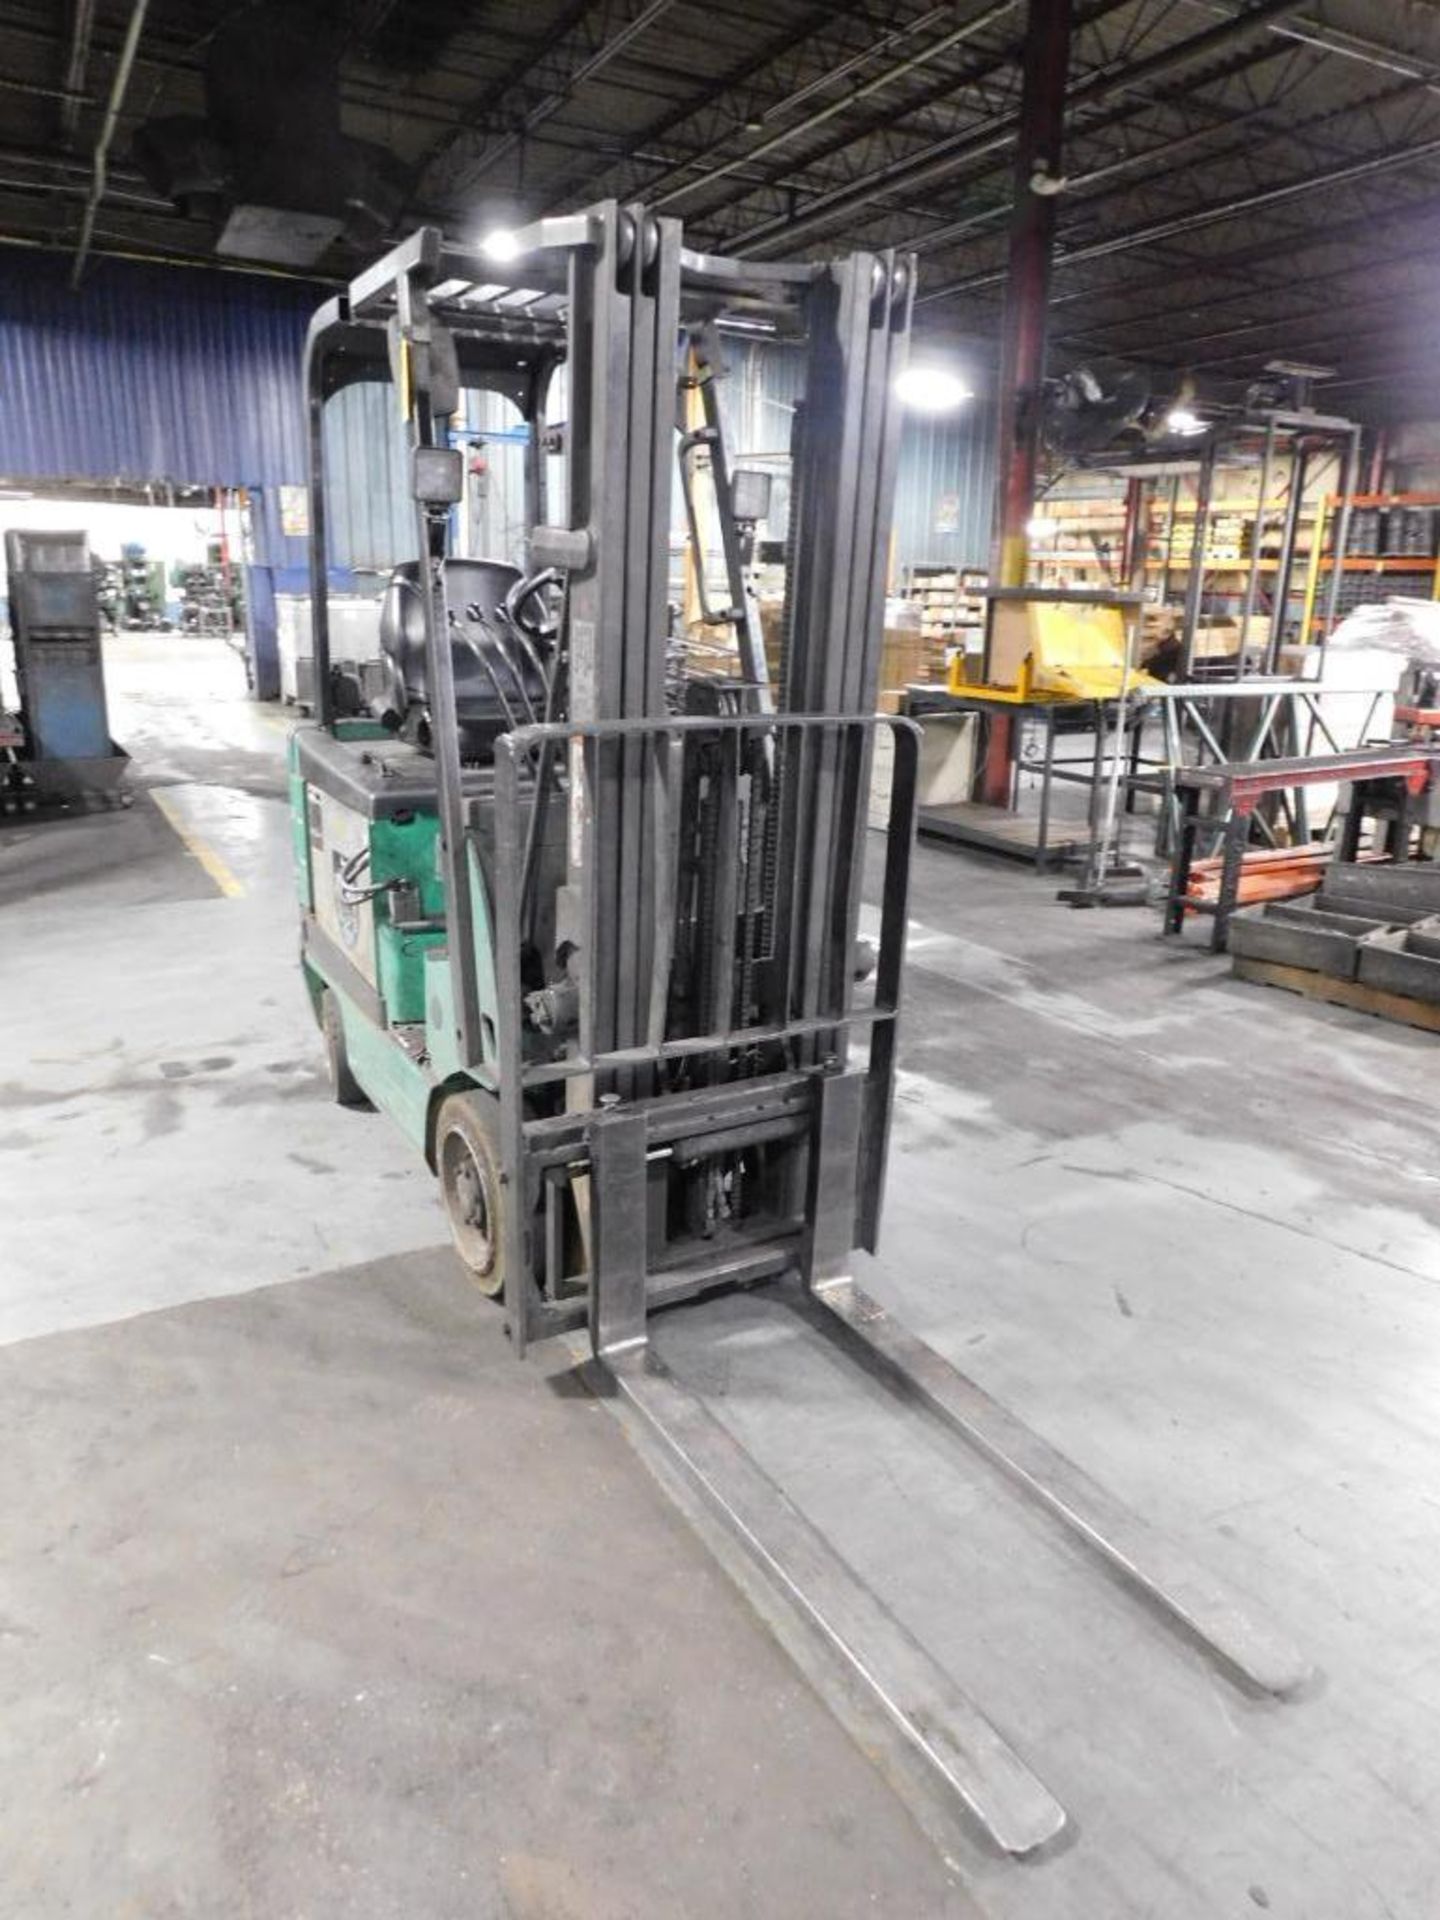 Mitsubishi Electric Forklift Model FBC15N-ACC, 3-Stage Mast, Side Shift, w/Charger, S/N ADC14020Z, 3 - Image 4 of 13